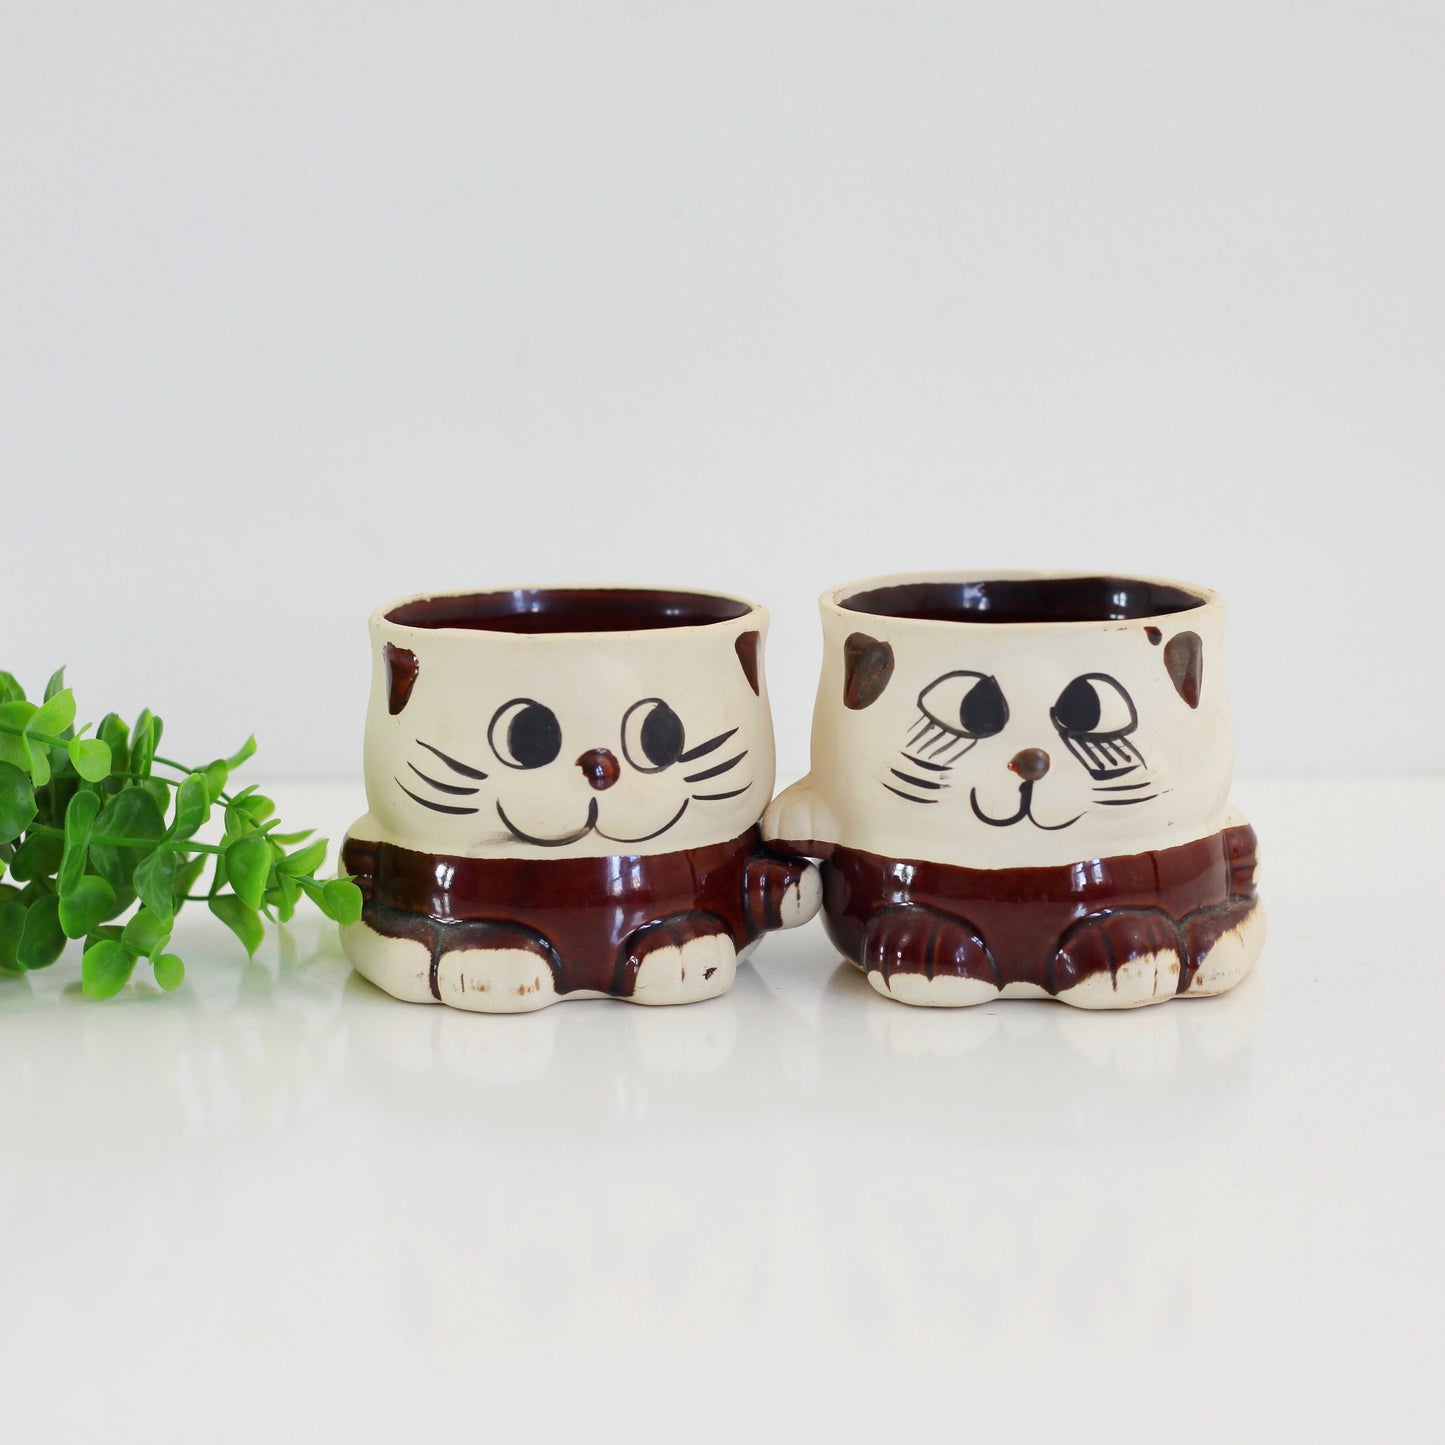 SOLD - Vintage Hand-Holding Stoneware Cat Planters